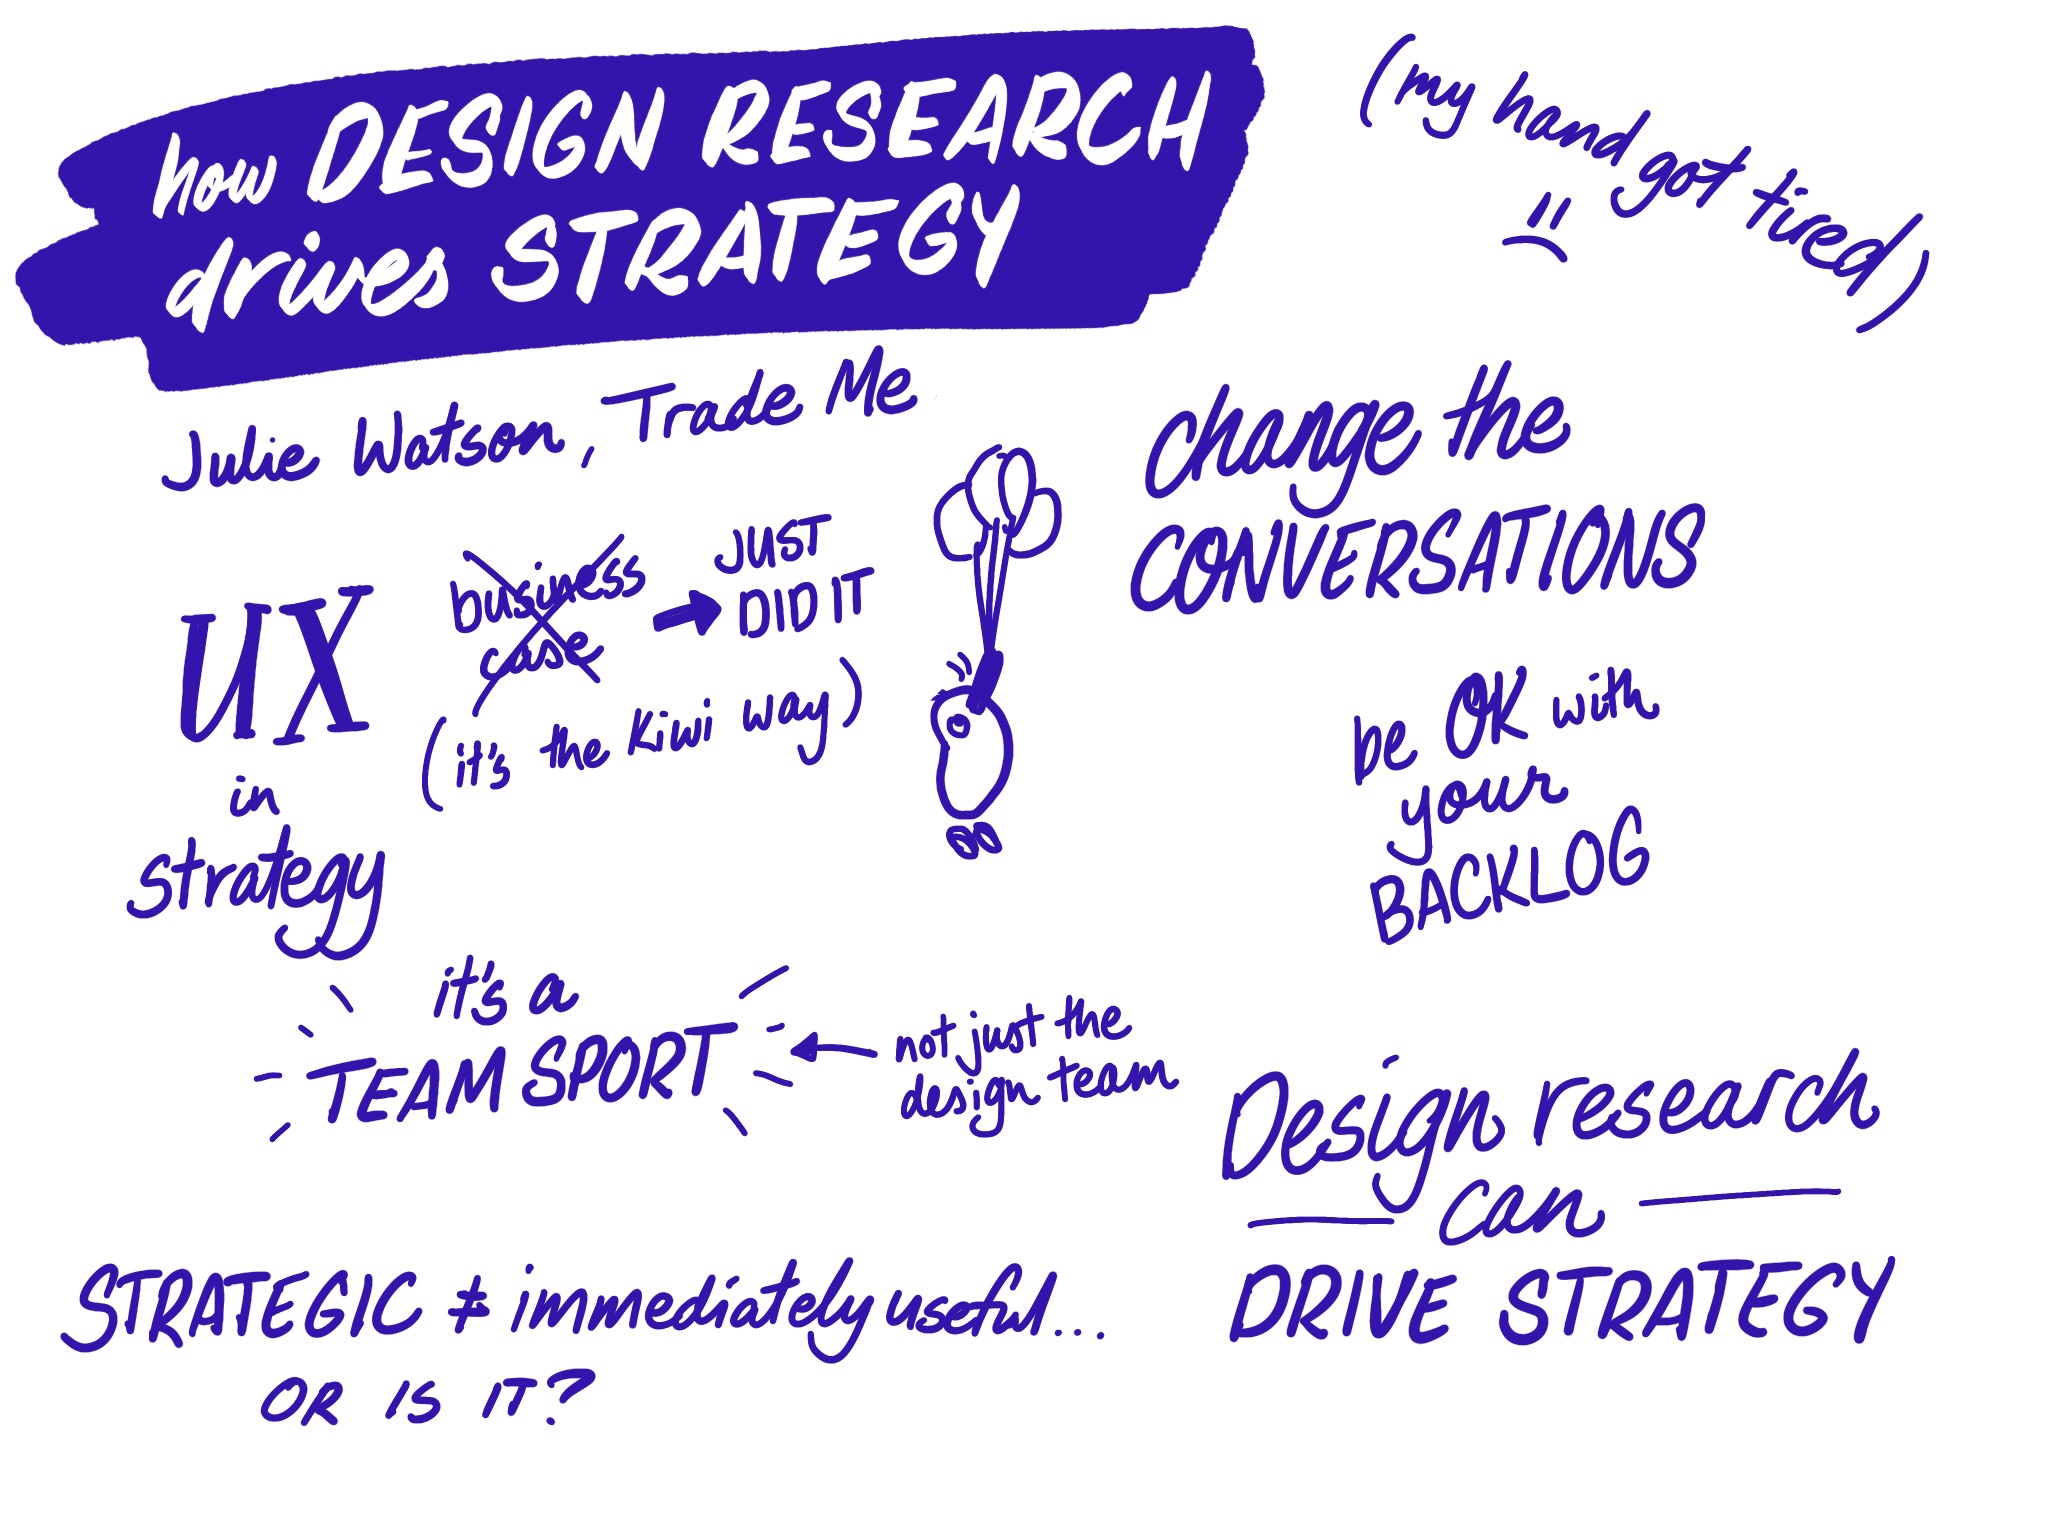 assets/sketching/img_1813.jpg|sketchnote: scaling a design research practice